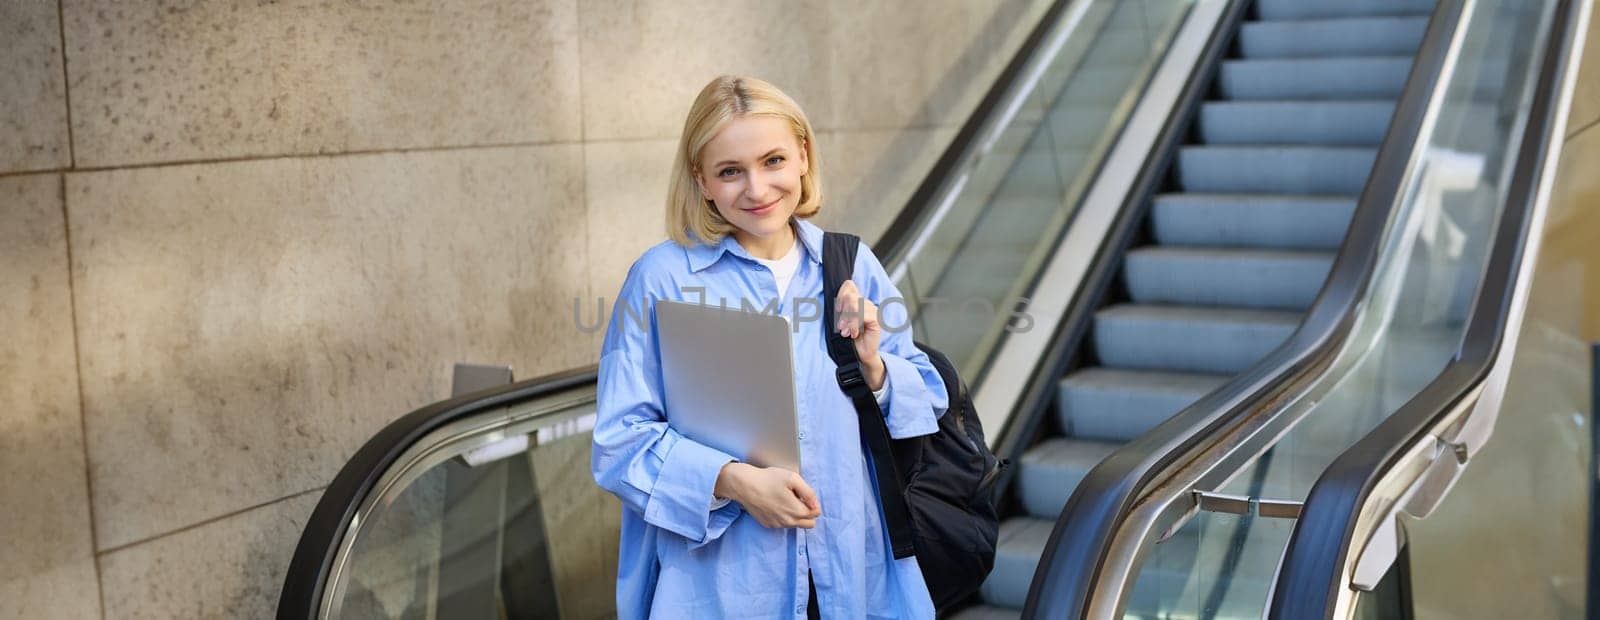 Education and people concept. Young woman with laptop and backpack, using escalator in city centre, smiling and looking at camera by Benzoix